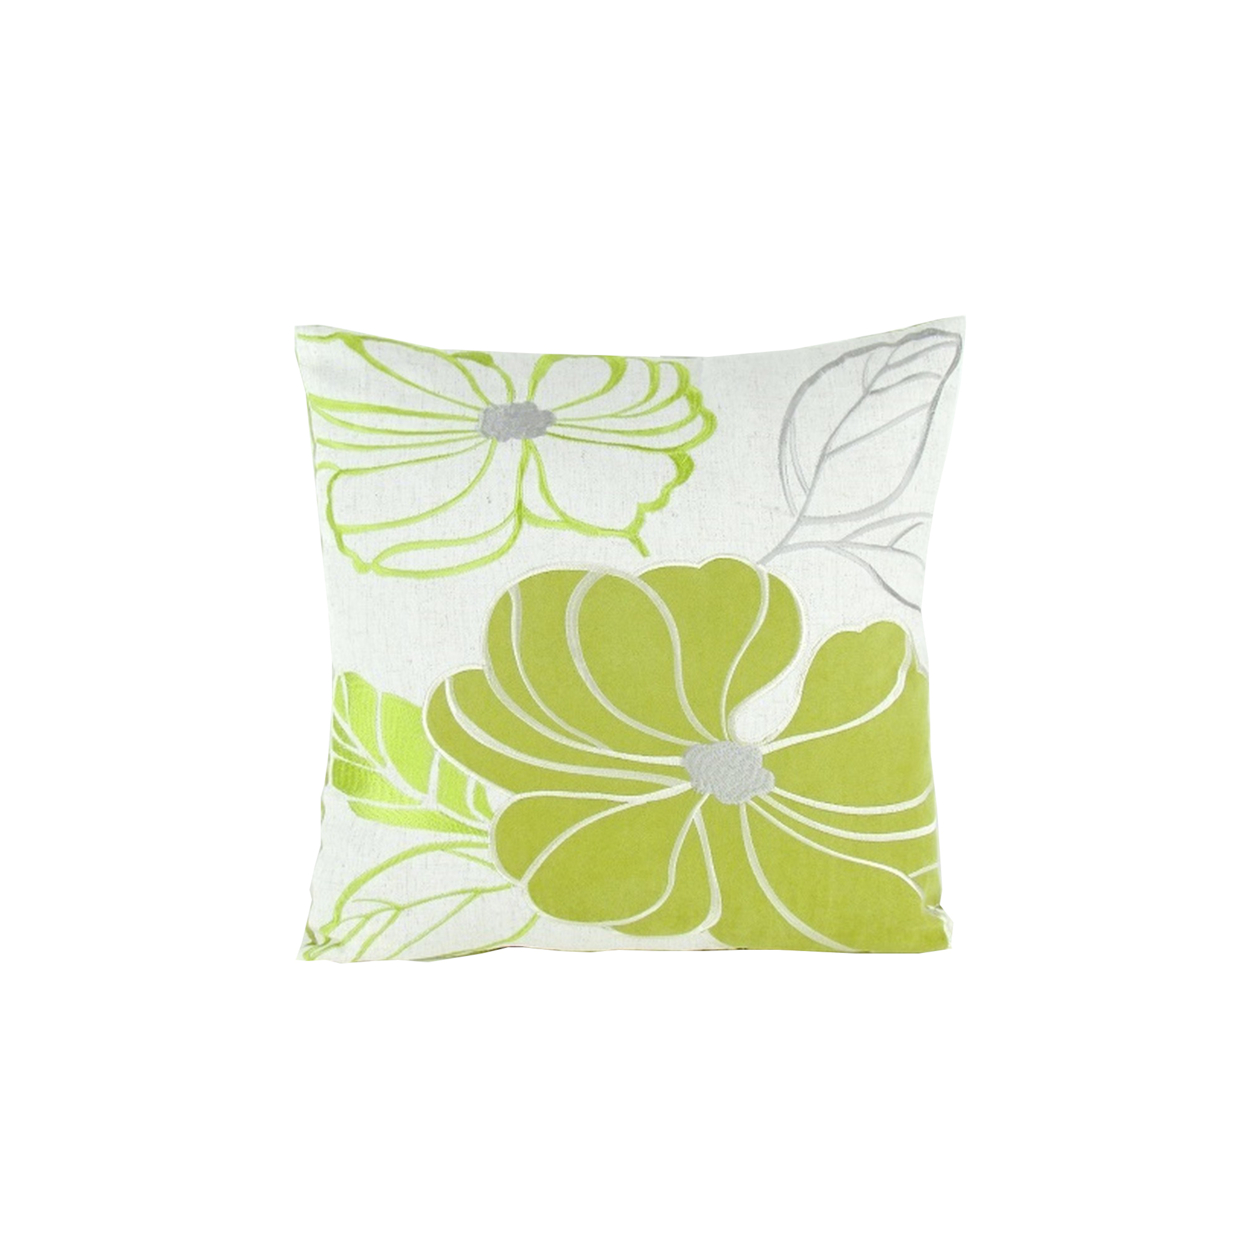 Floral Pattern Fabric Accent Pillow, Green And White- Saltoro Sherpi